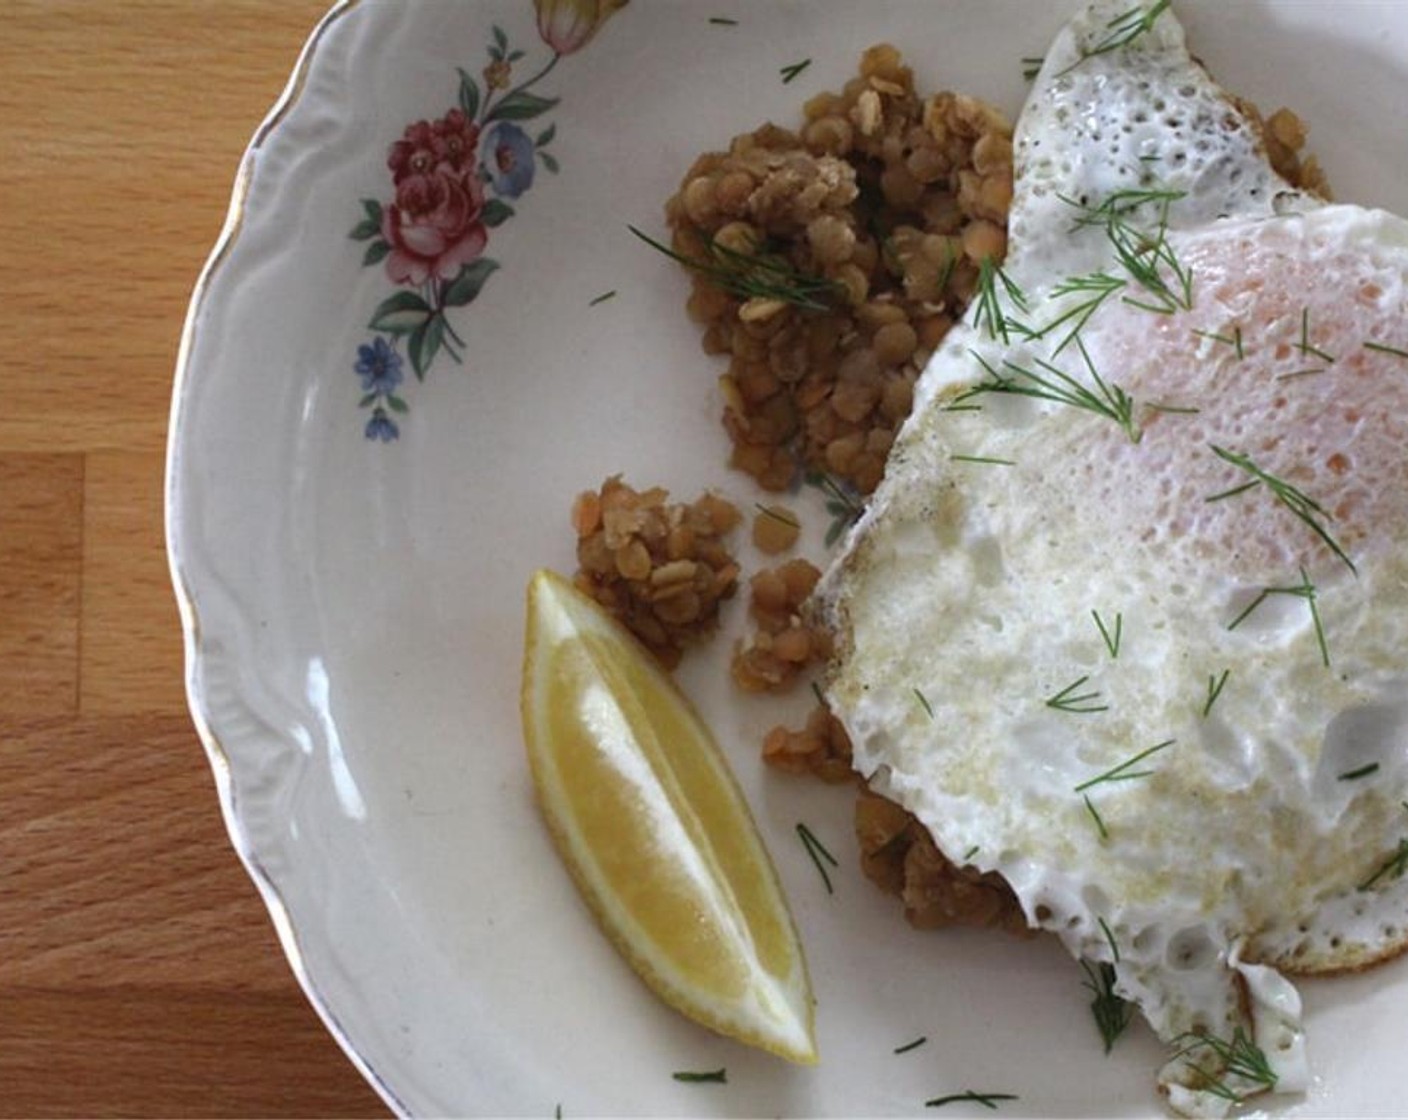 step 3 Divide lentils between two plates and top with eggs, Fresh Dill (1/2 Tbsp), and a squeeze of Lemons (2 slices).